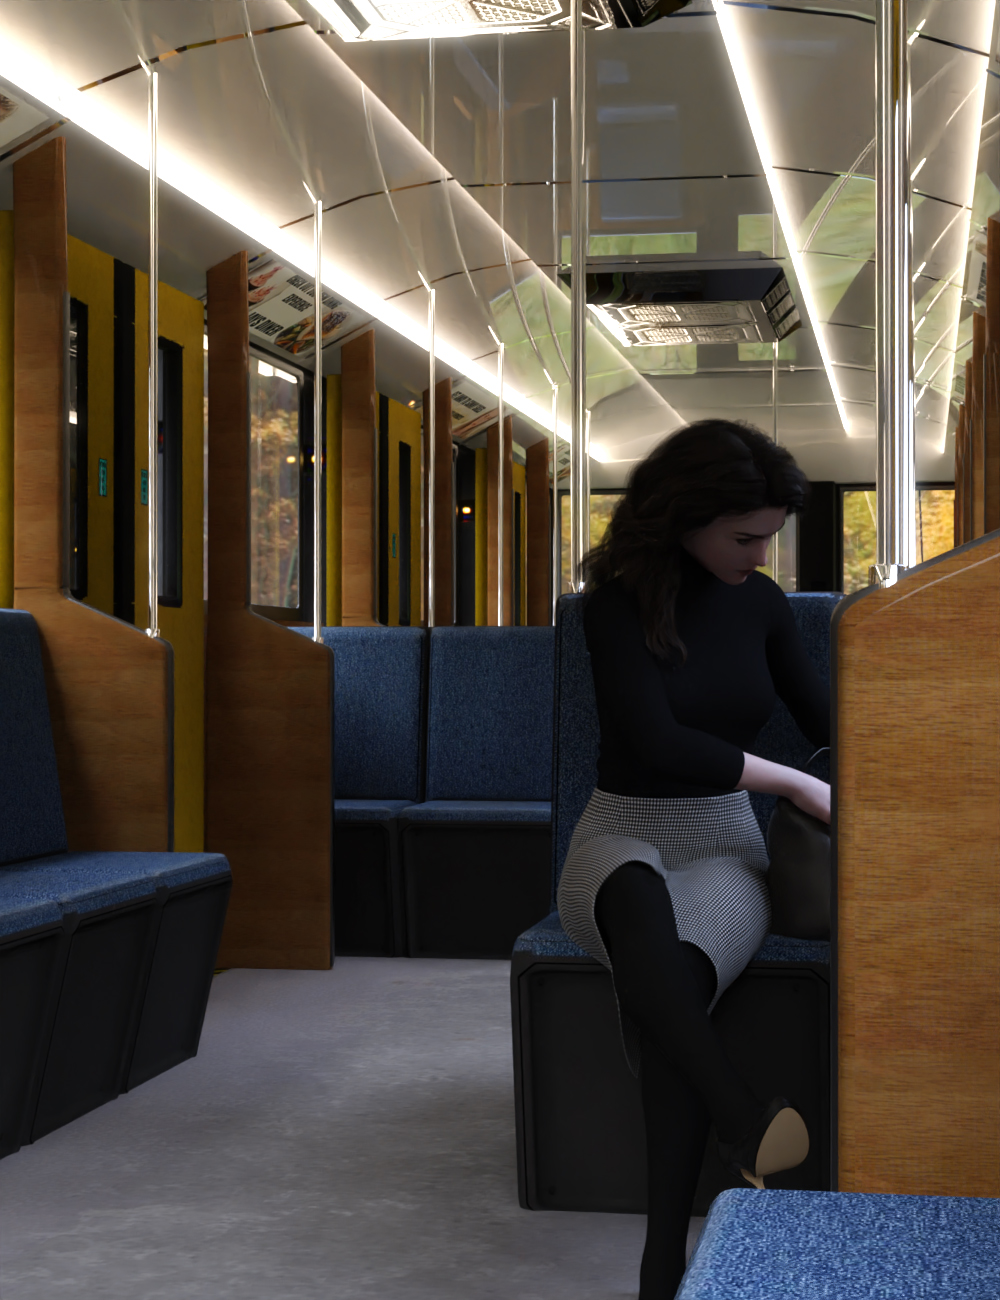 Subway Train For Iray by: Serum, 3D Models by Daz 3D